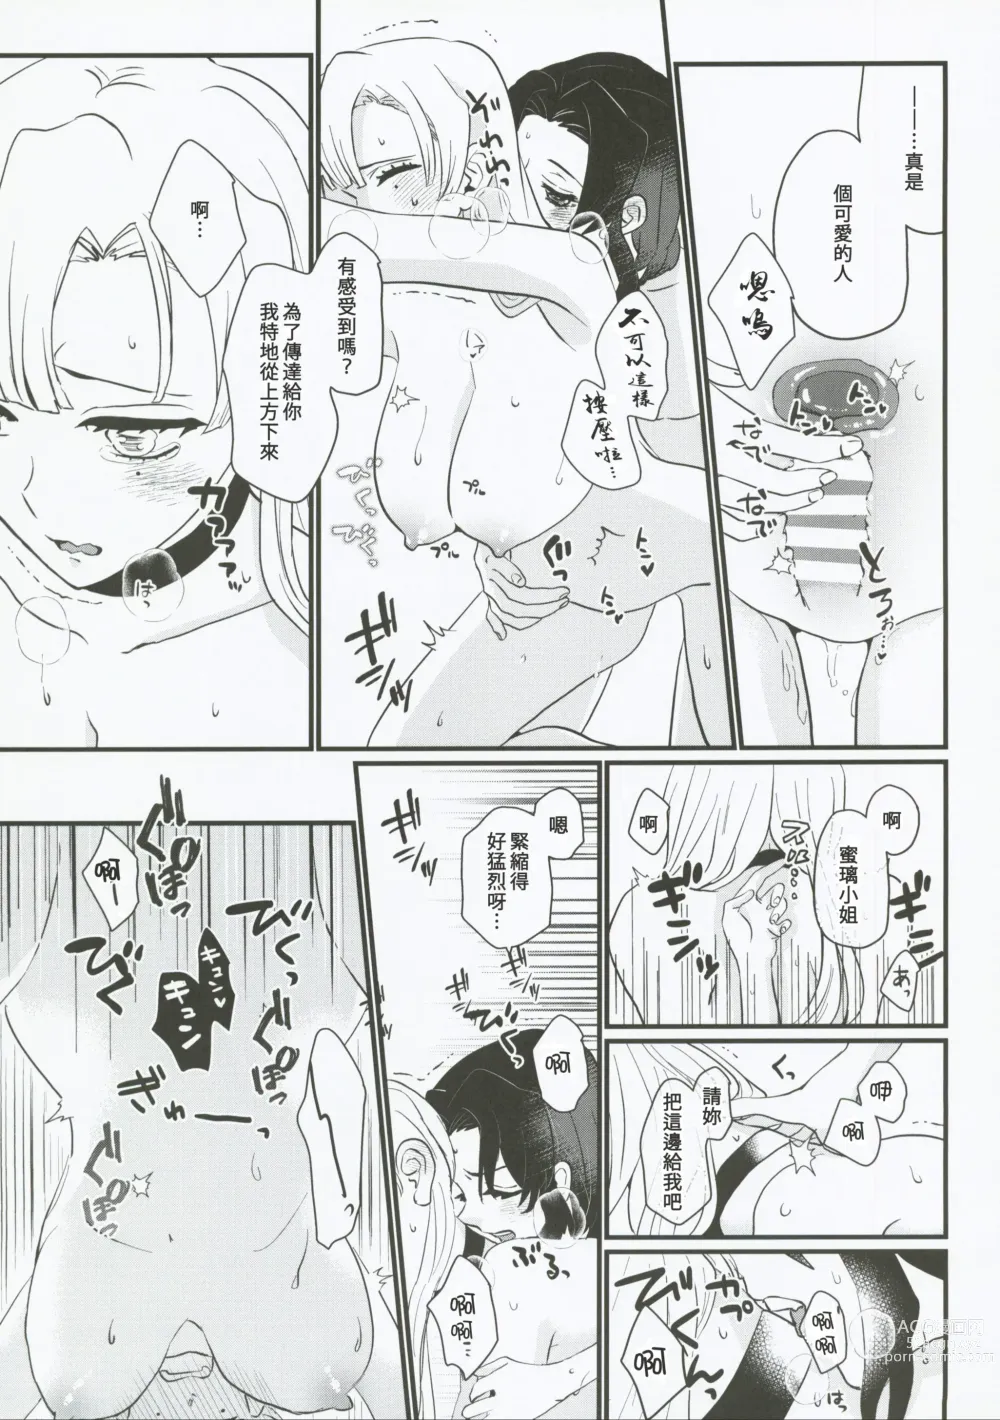 Page 40 of doujinshi 屬於妳的Omega